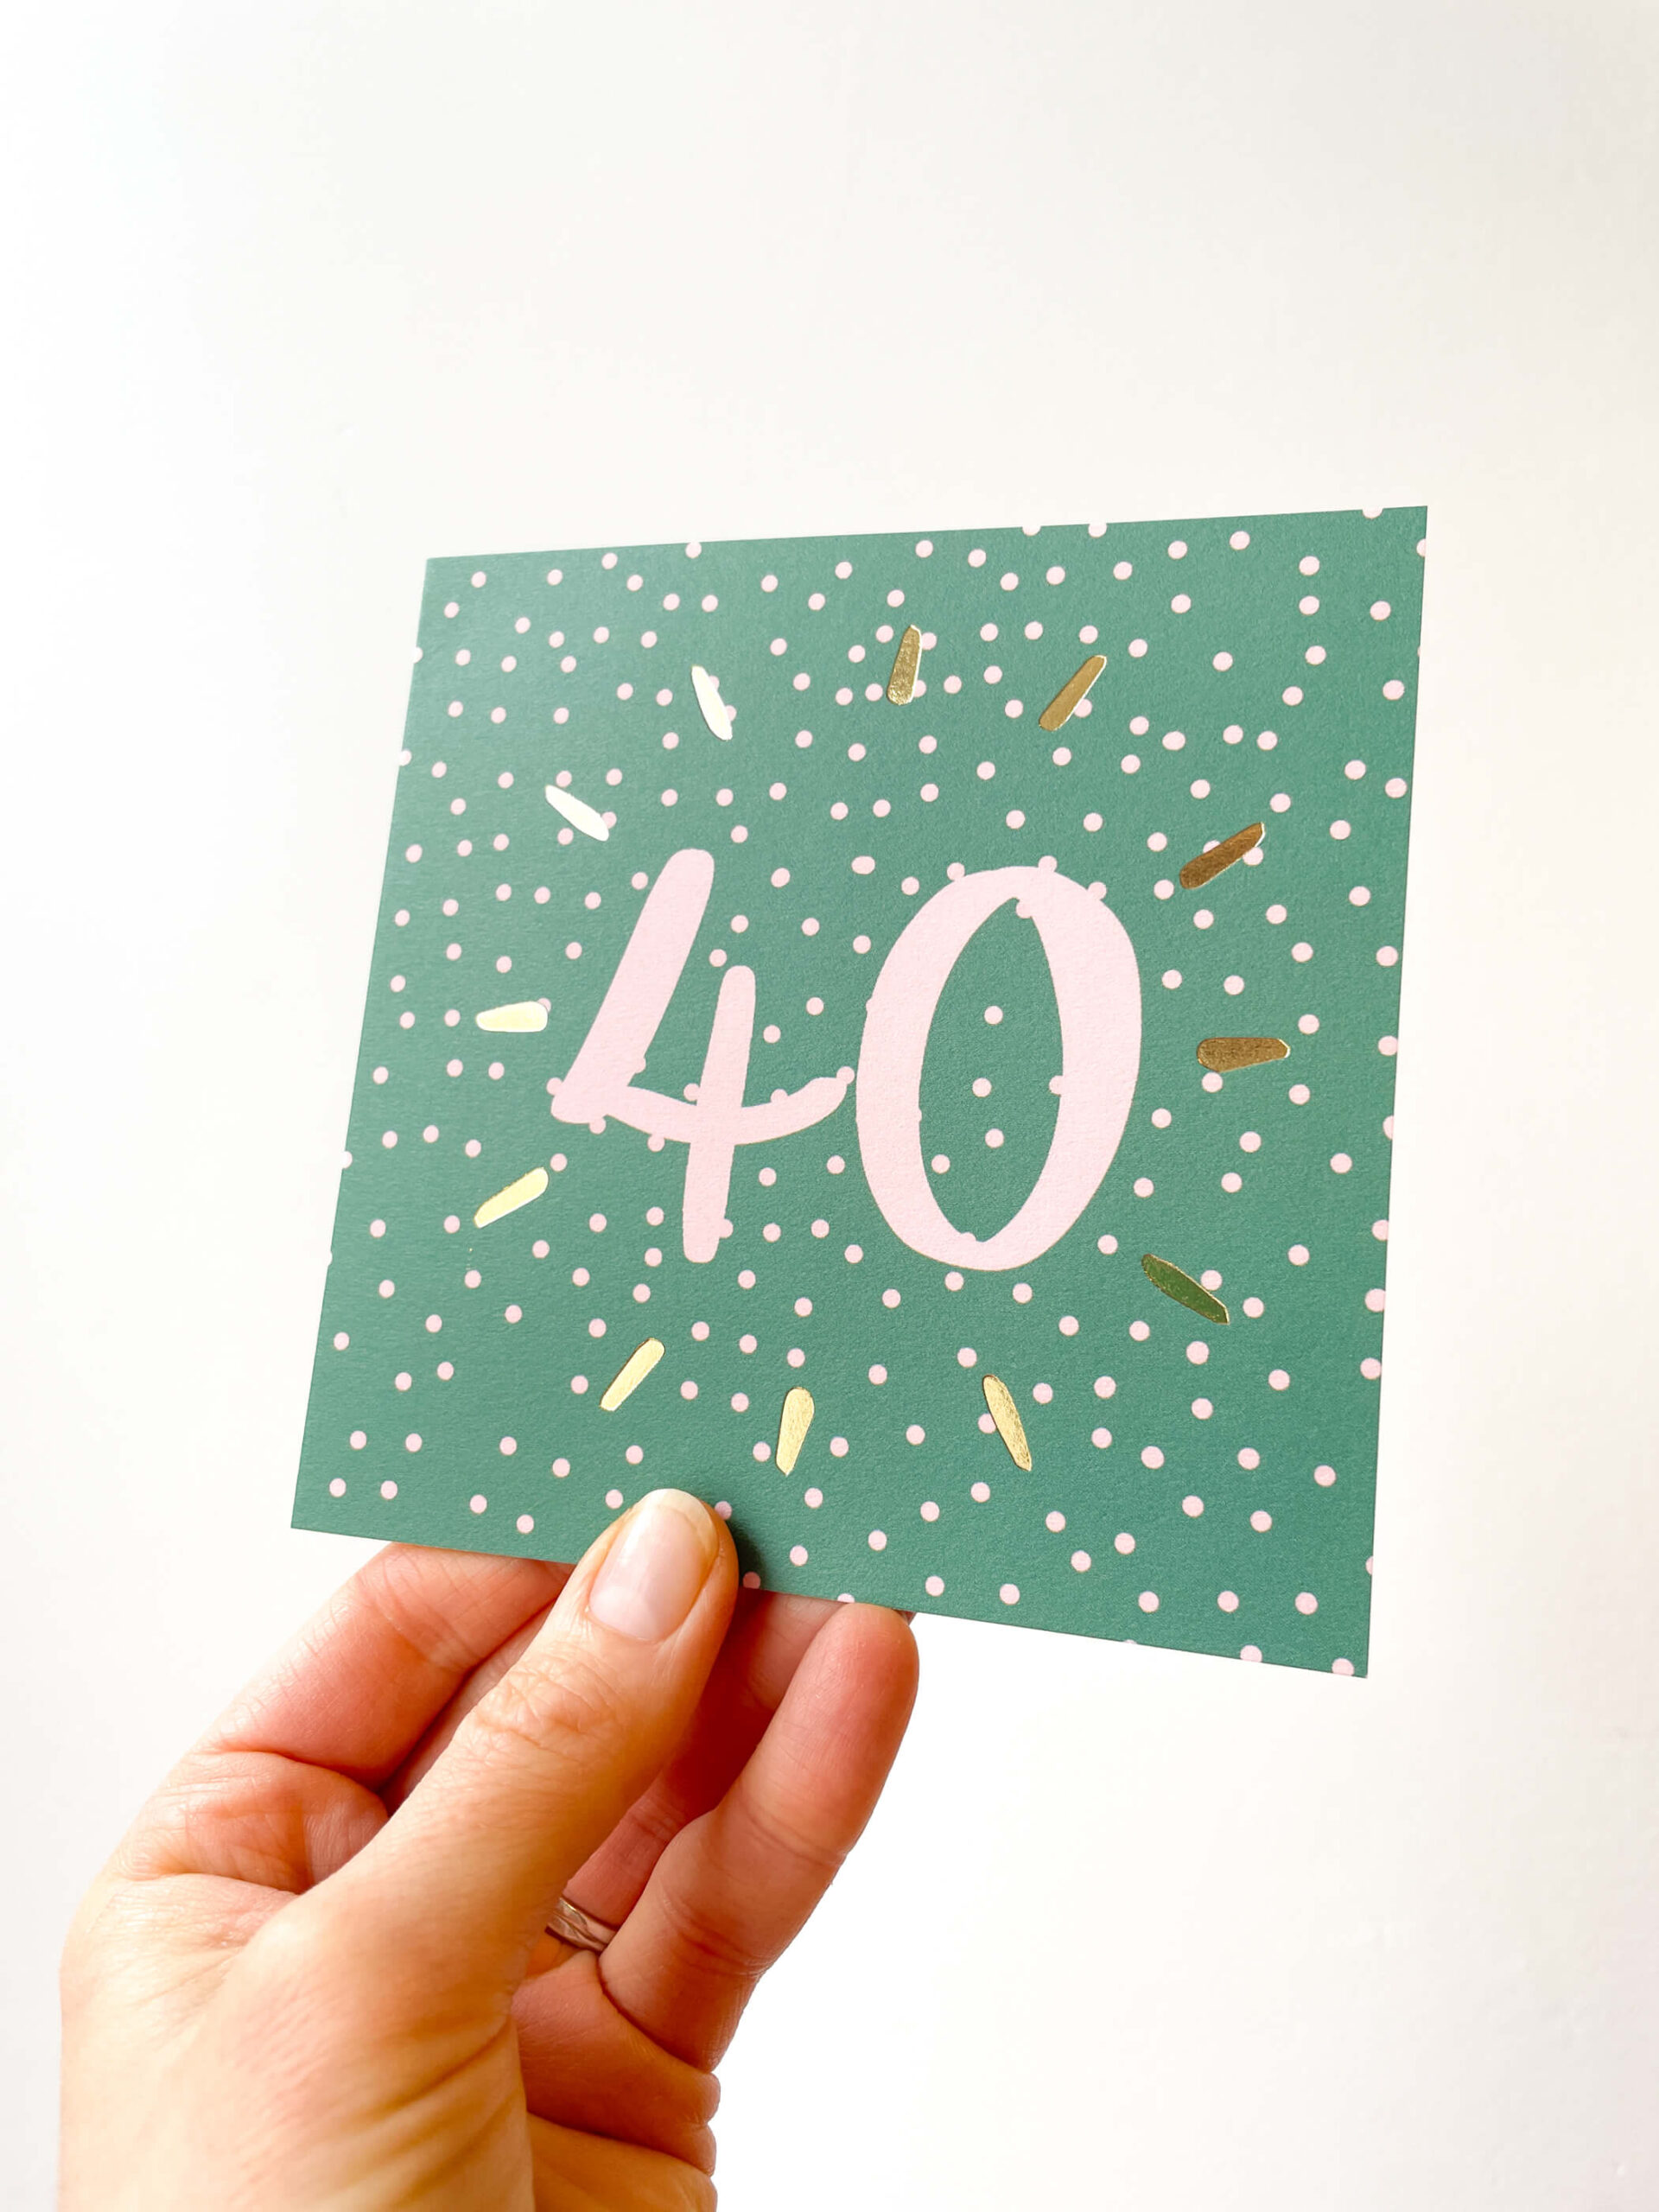 40th birthday card in green and pink spotty design